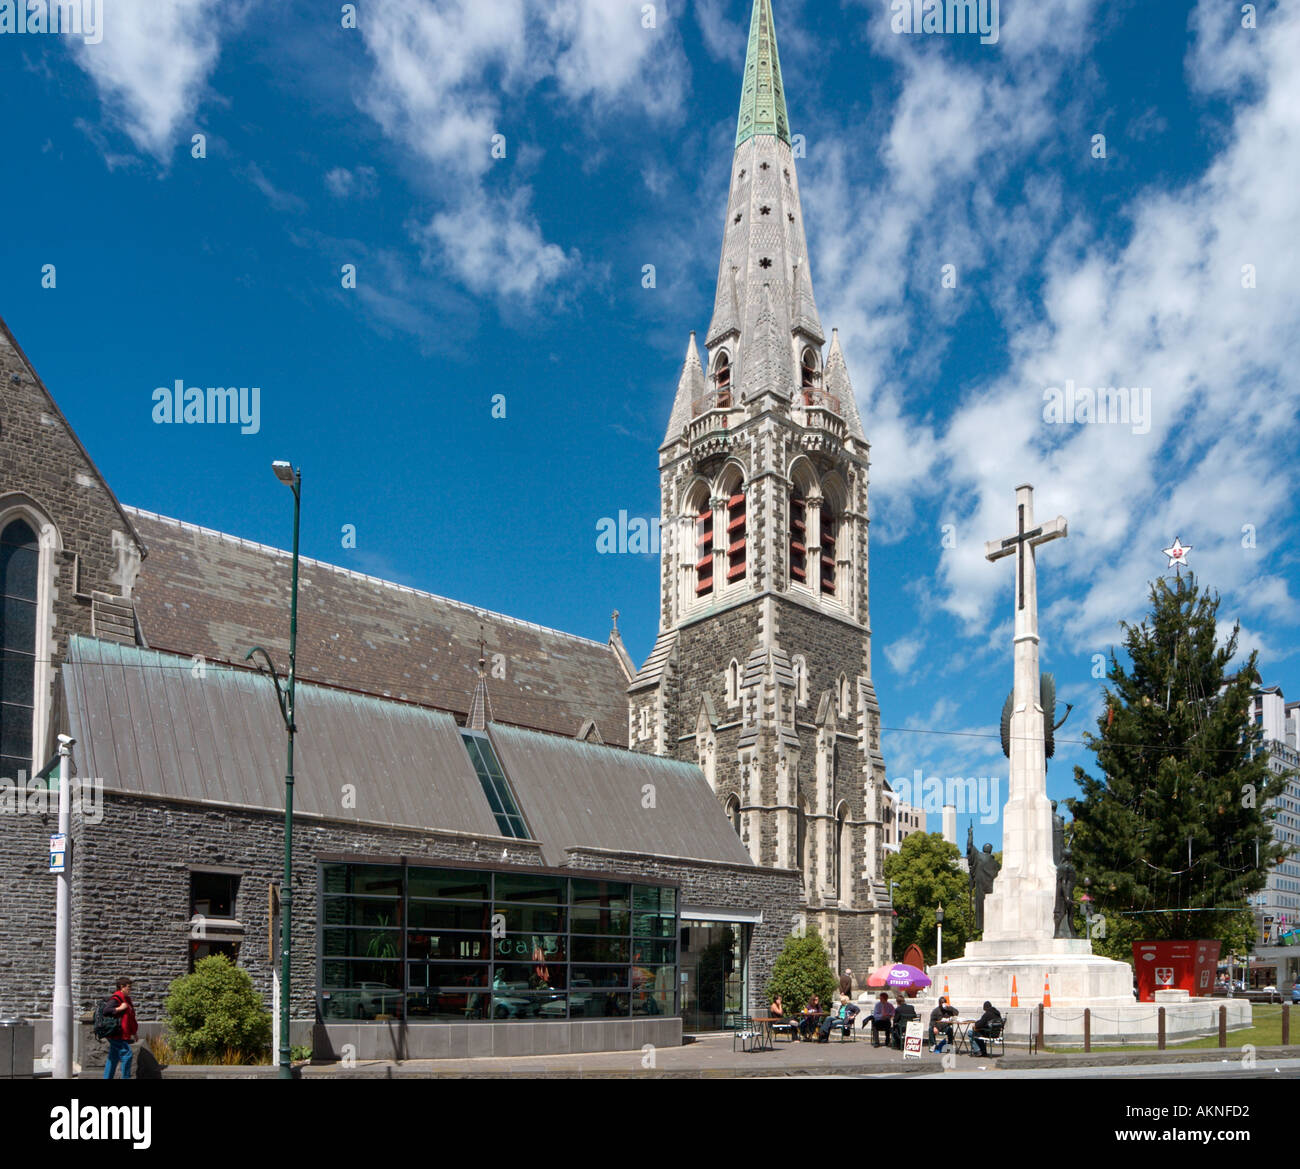 Christchurch Cathedral, Christchurch, South Island, New Zealand. Image taken before the 2011 earthquake. Stock Photo